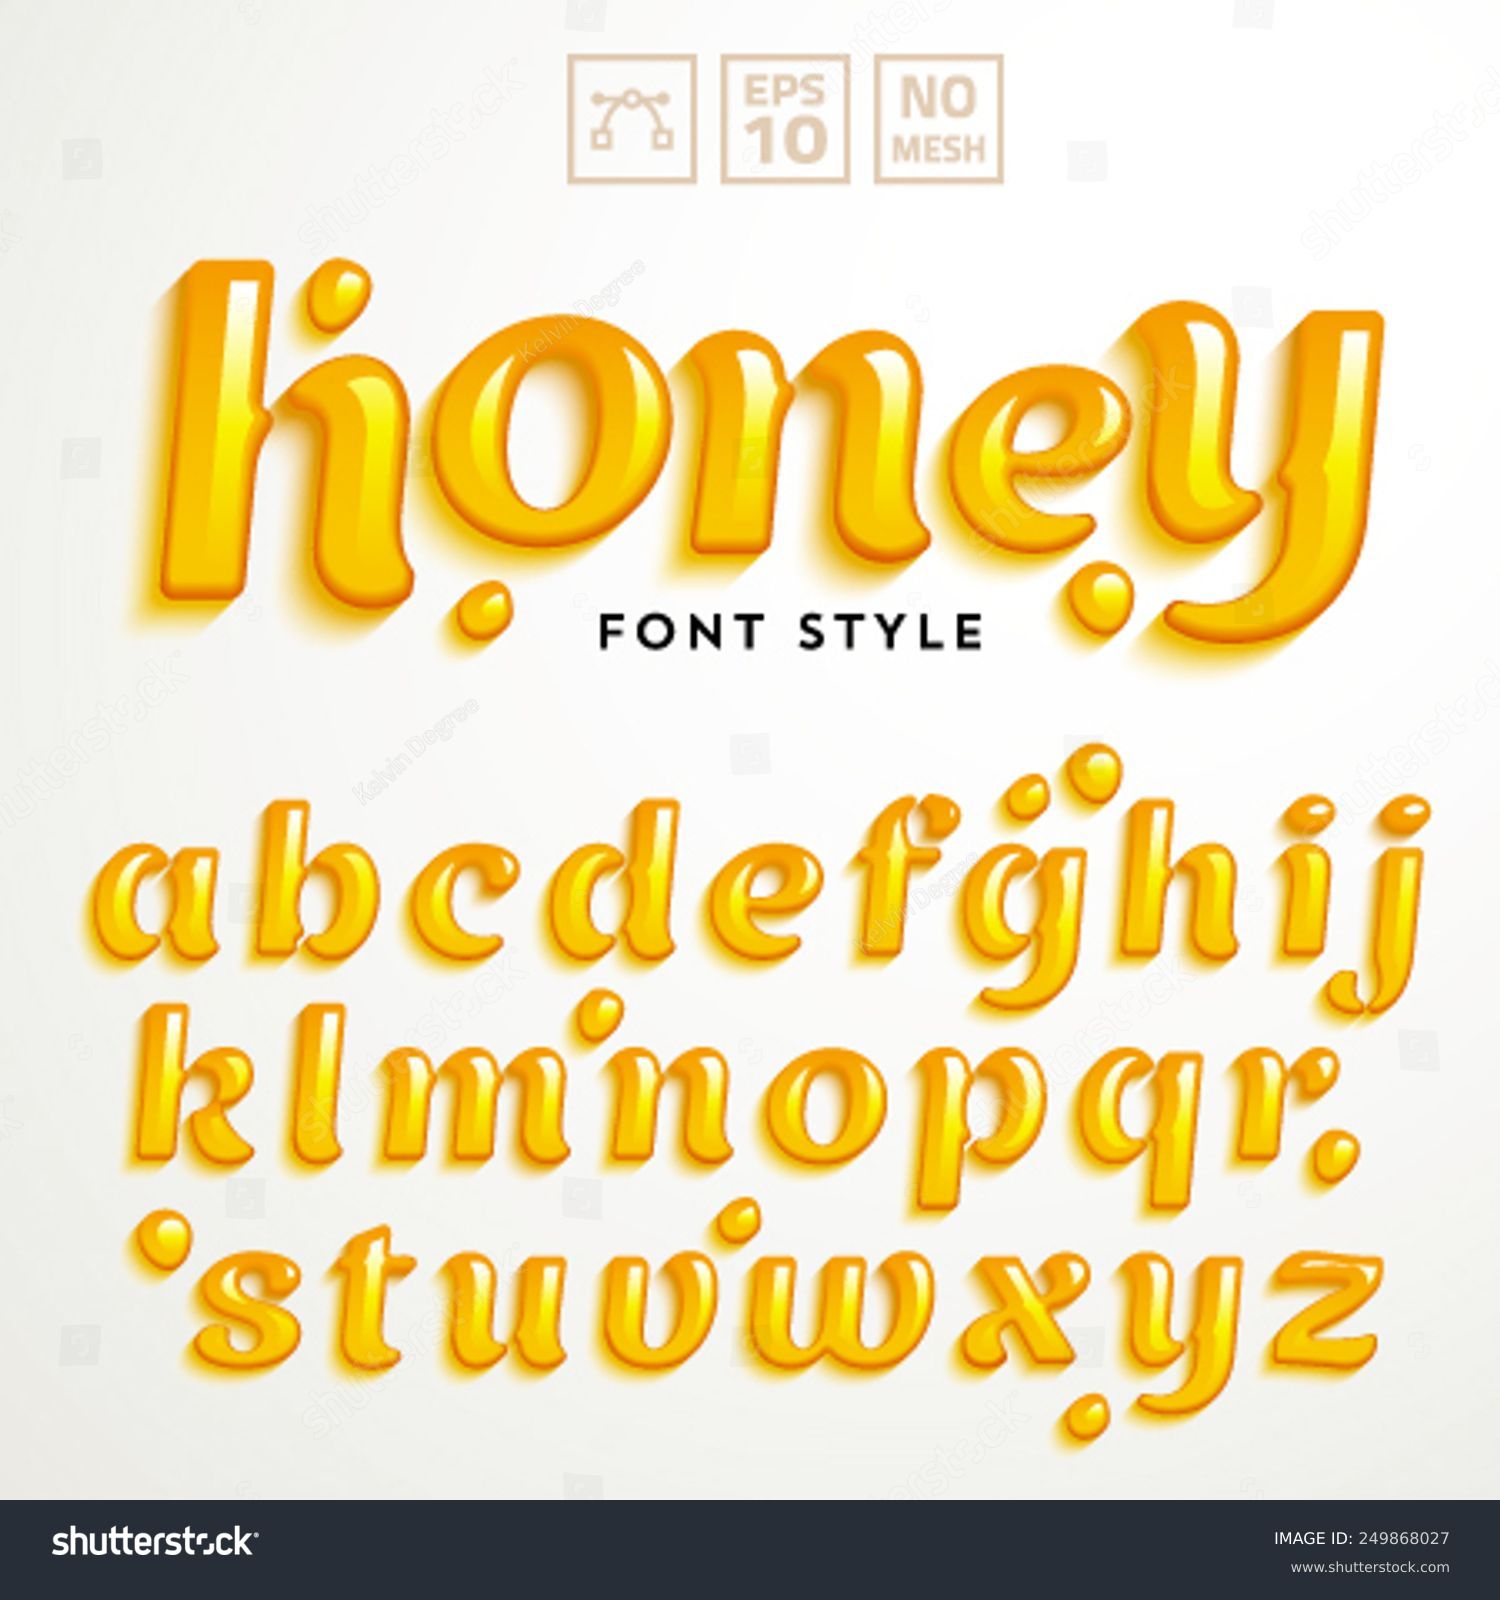 What is font style?